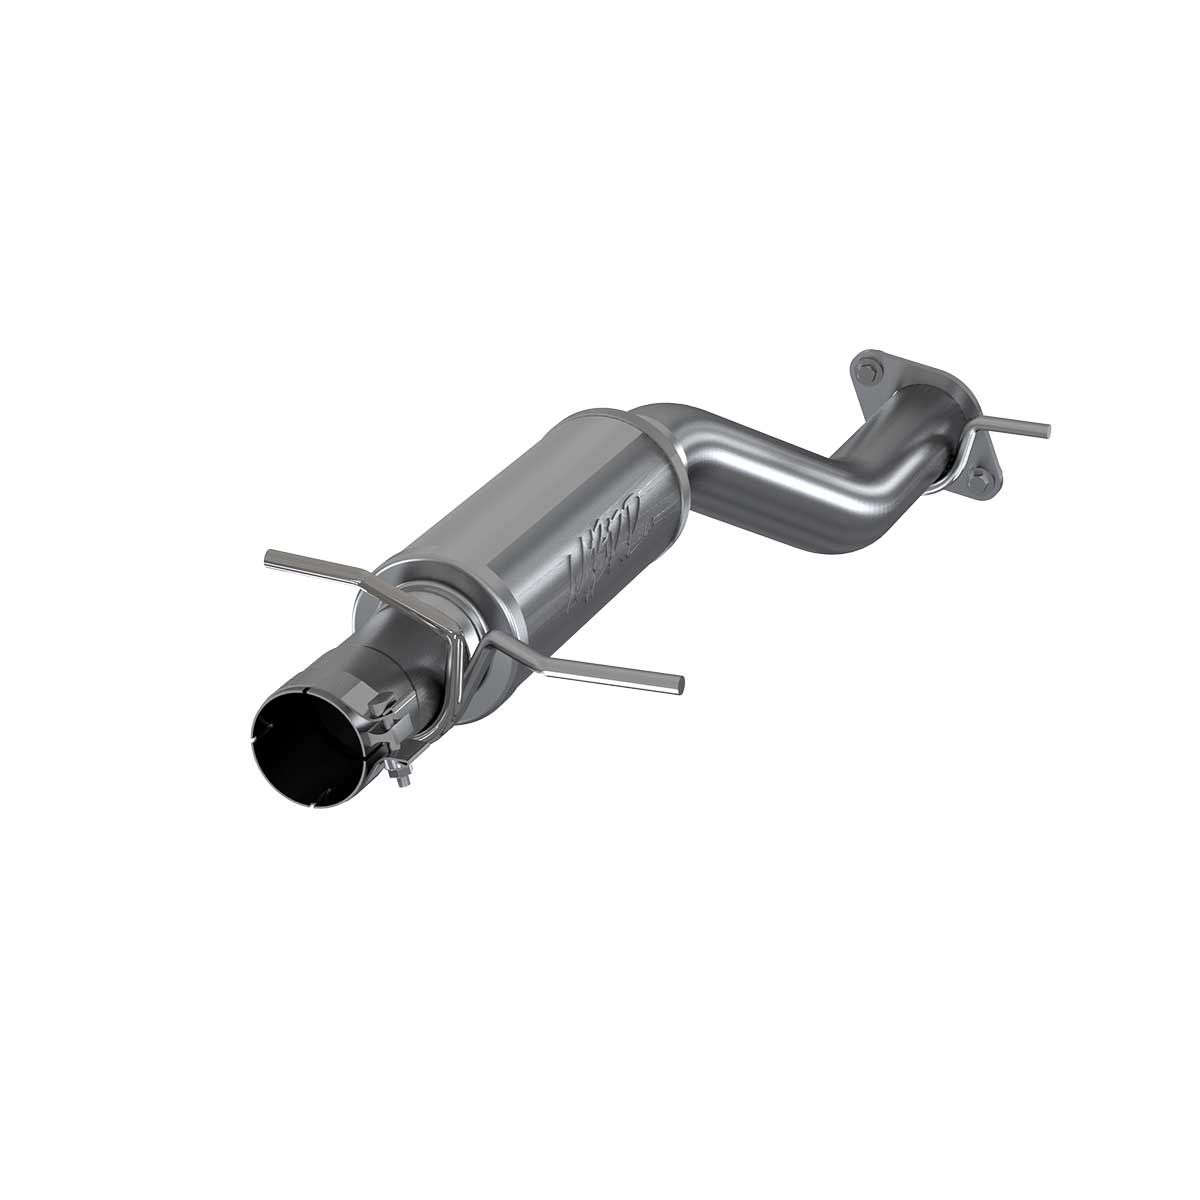 MBRP - MBRP Dodge 3 Inch Single In/Out Muffler Replacement XP Series For 19-20 RAM 1500 5.7L Hemi S5143409